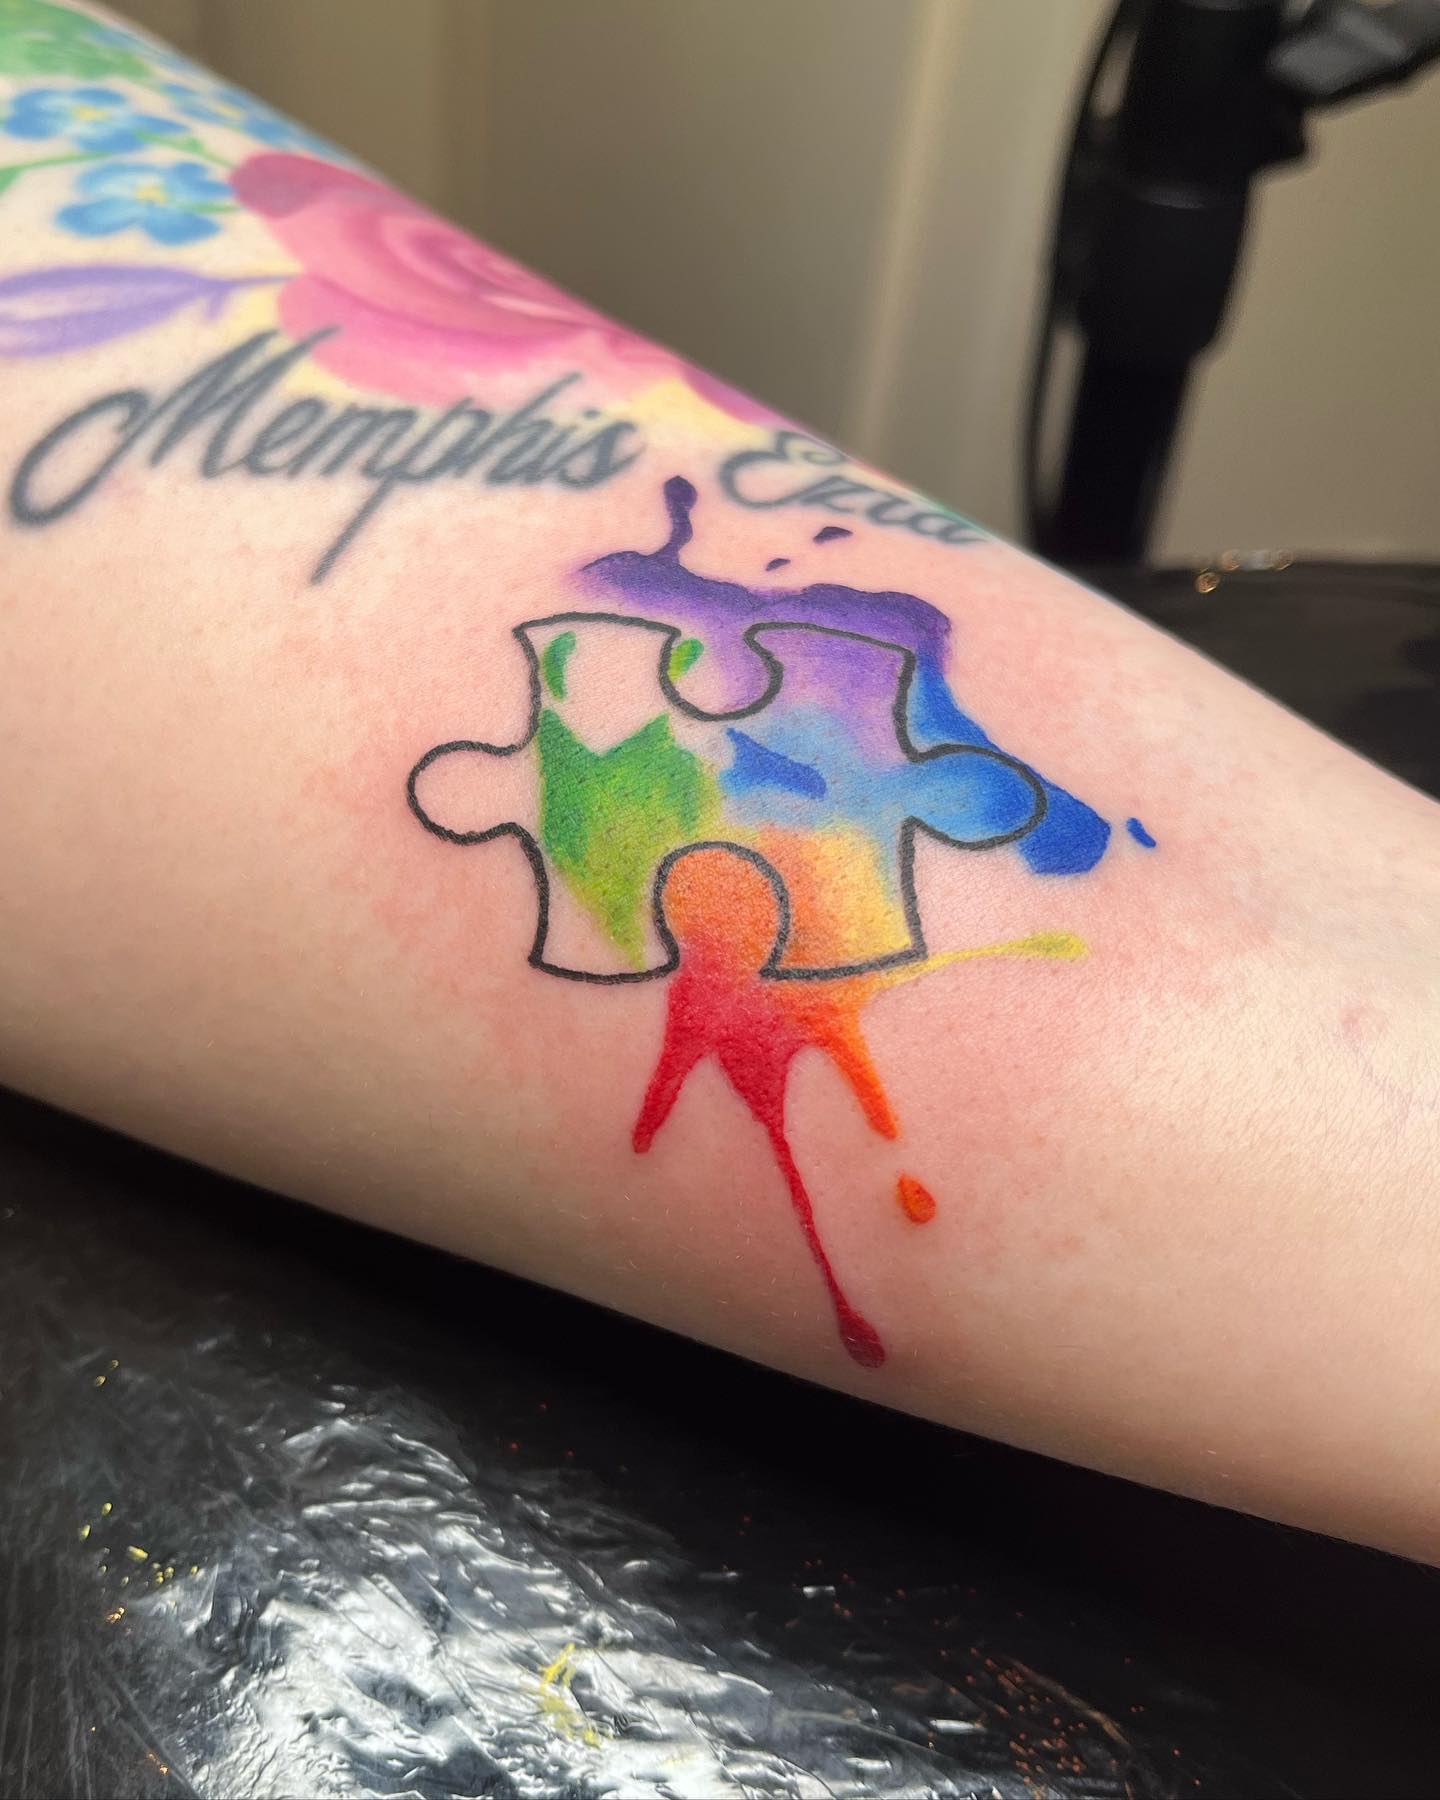 Try out this puzzle tattoo and show your true yet bright colors with your funky print.